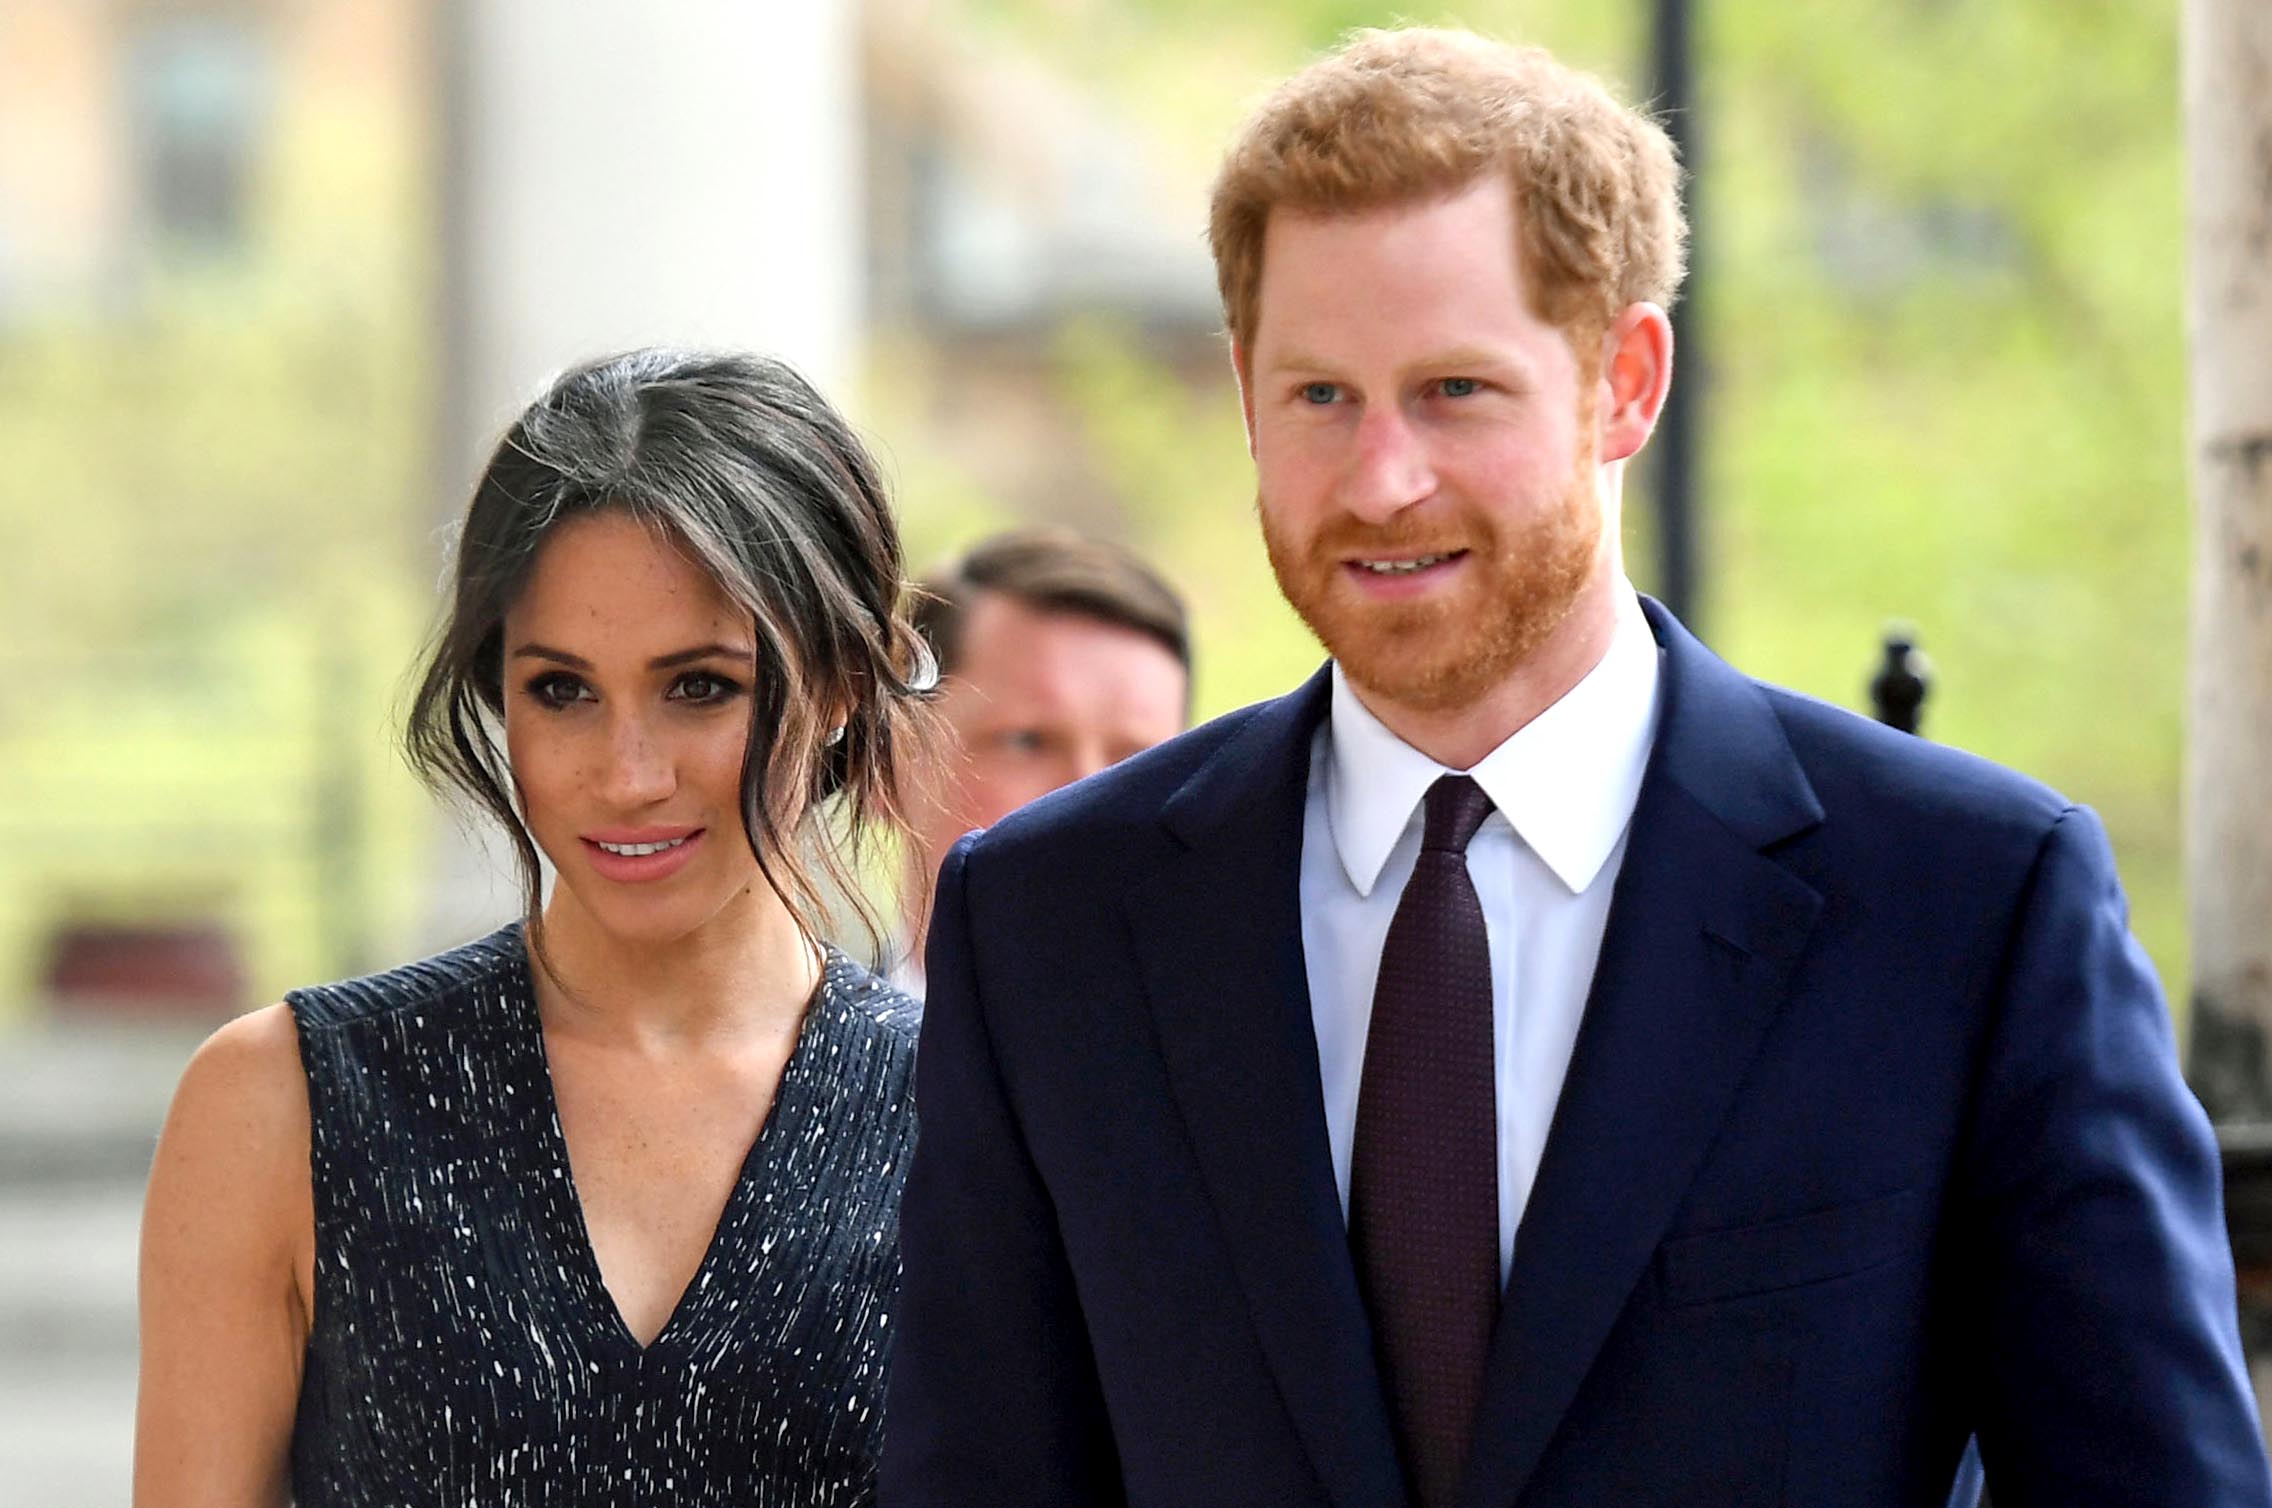 Meghan and Harry at an event